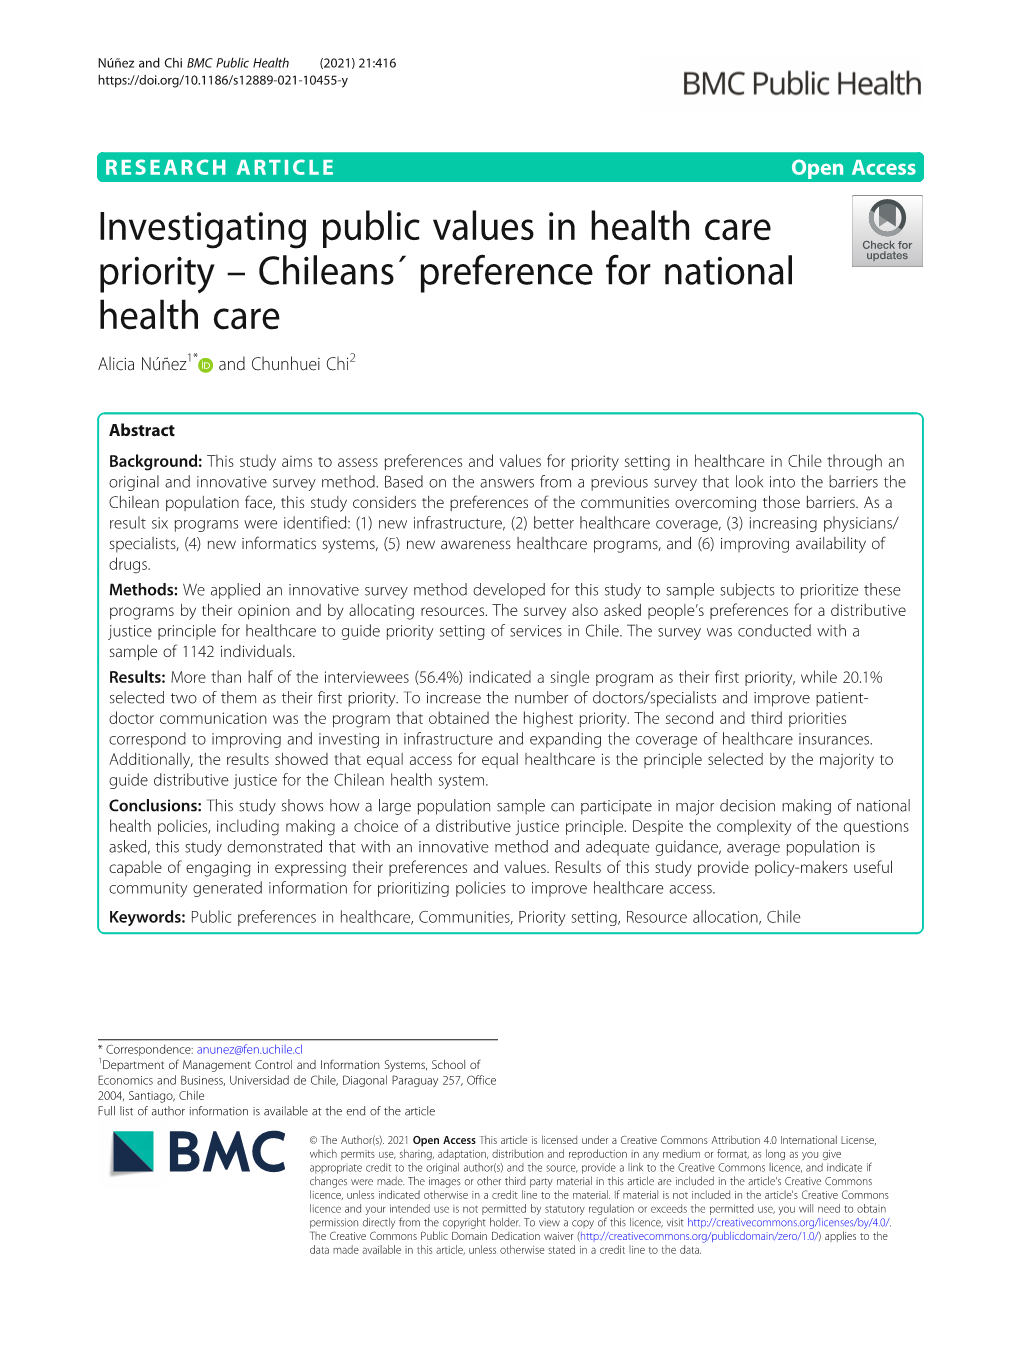 Investigating Public Values in Health Care Priority – Chileans´ Preference for National Health Care Alicia Núñez1* and Chunhuei Chi2